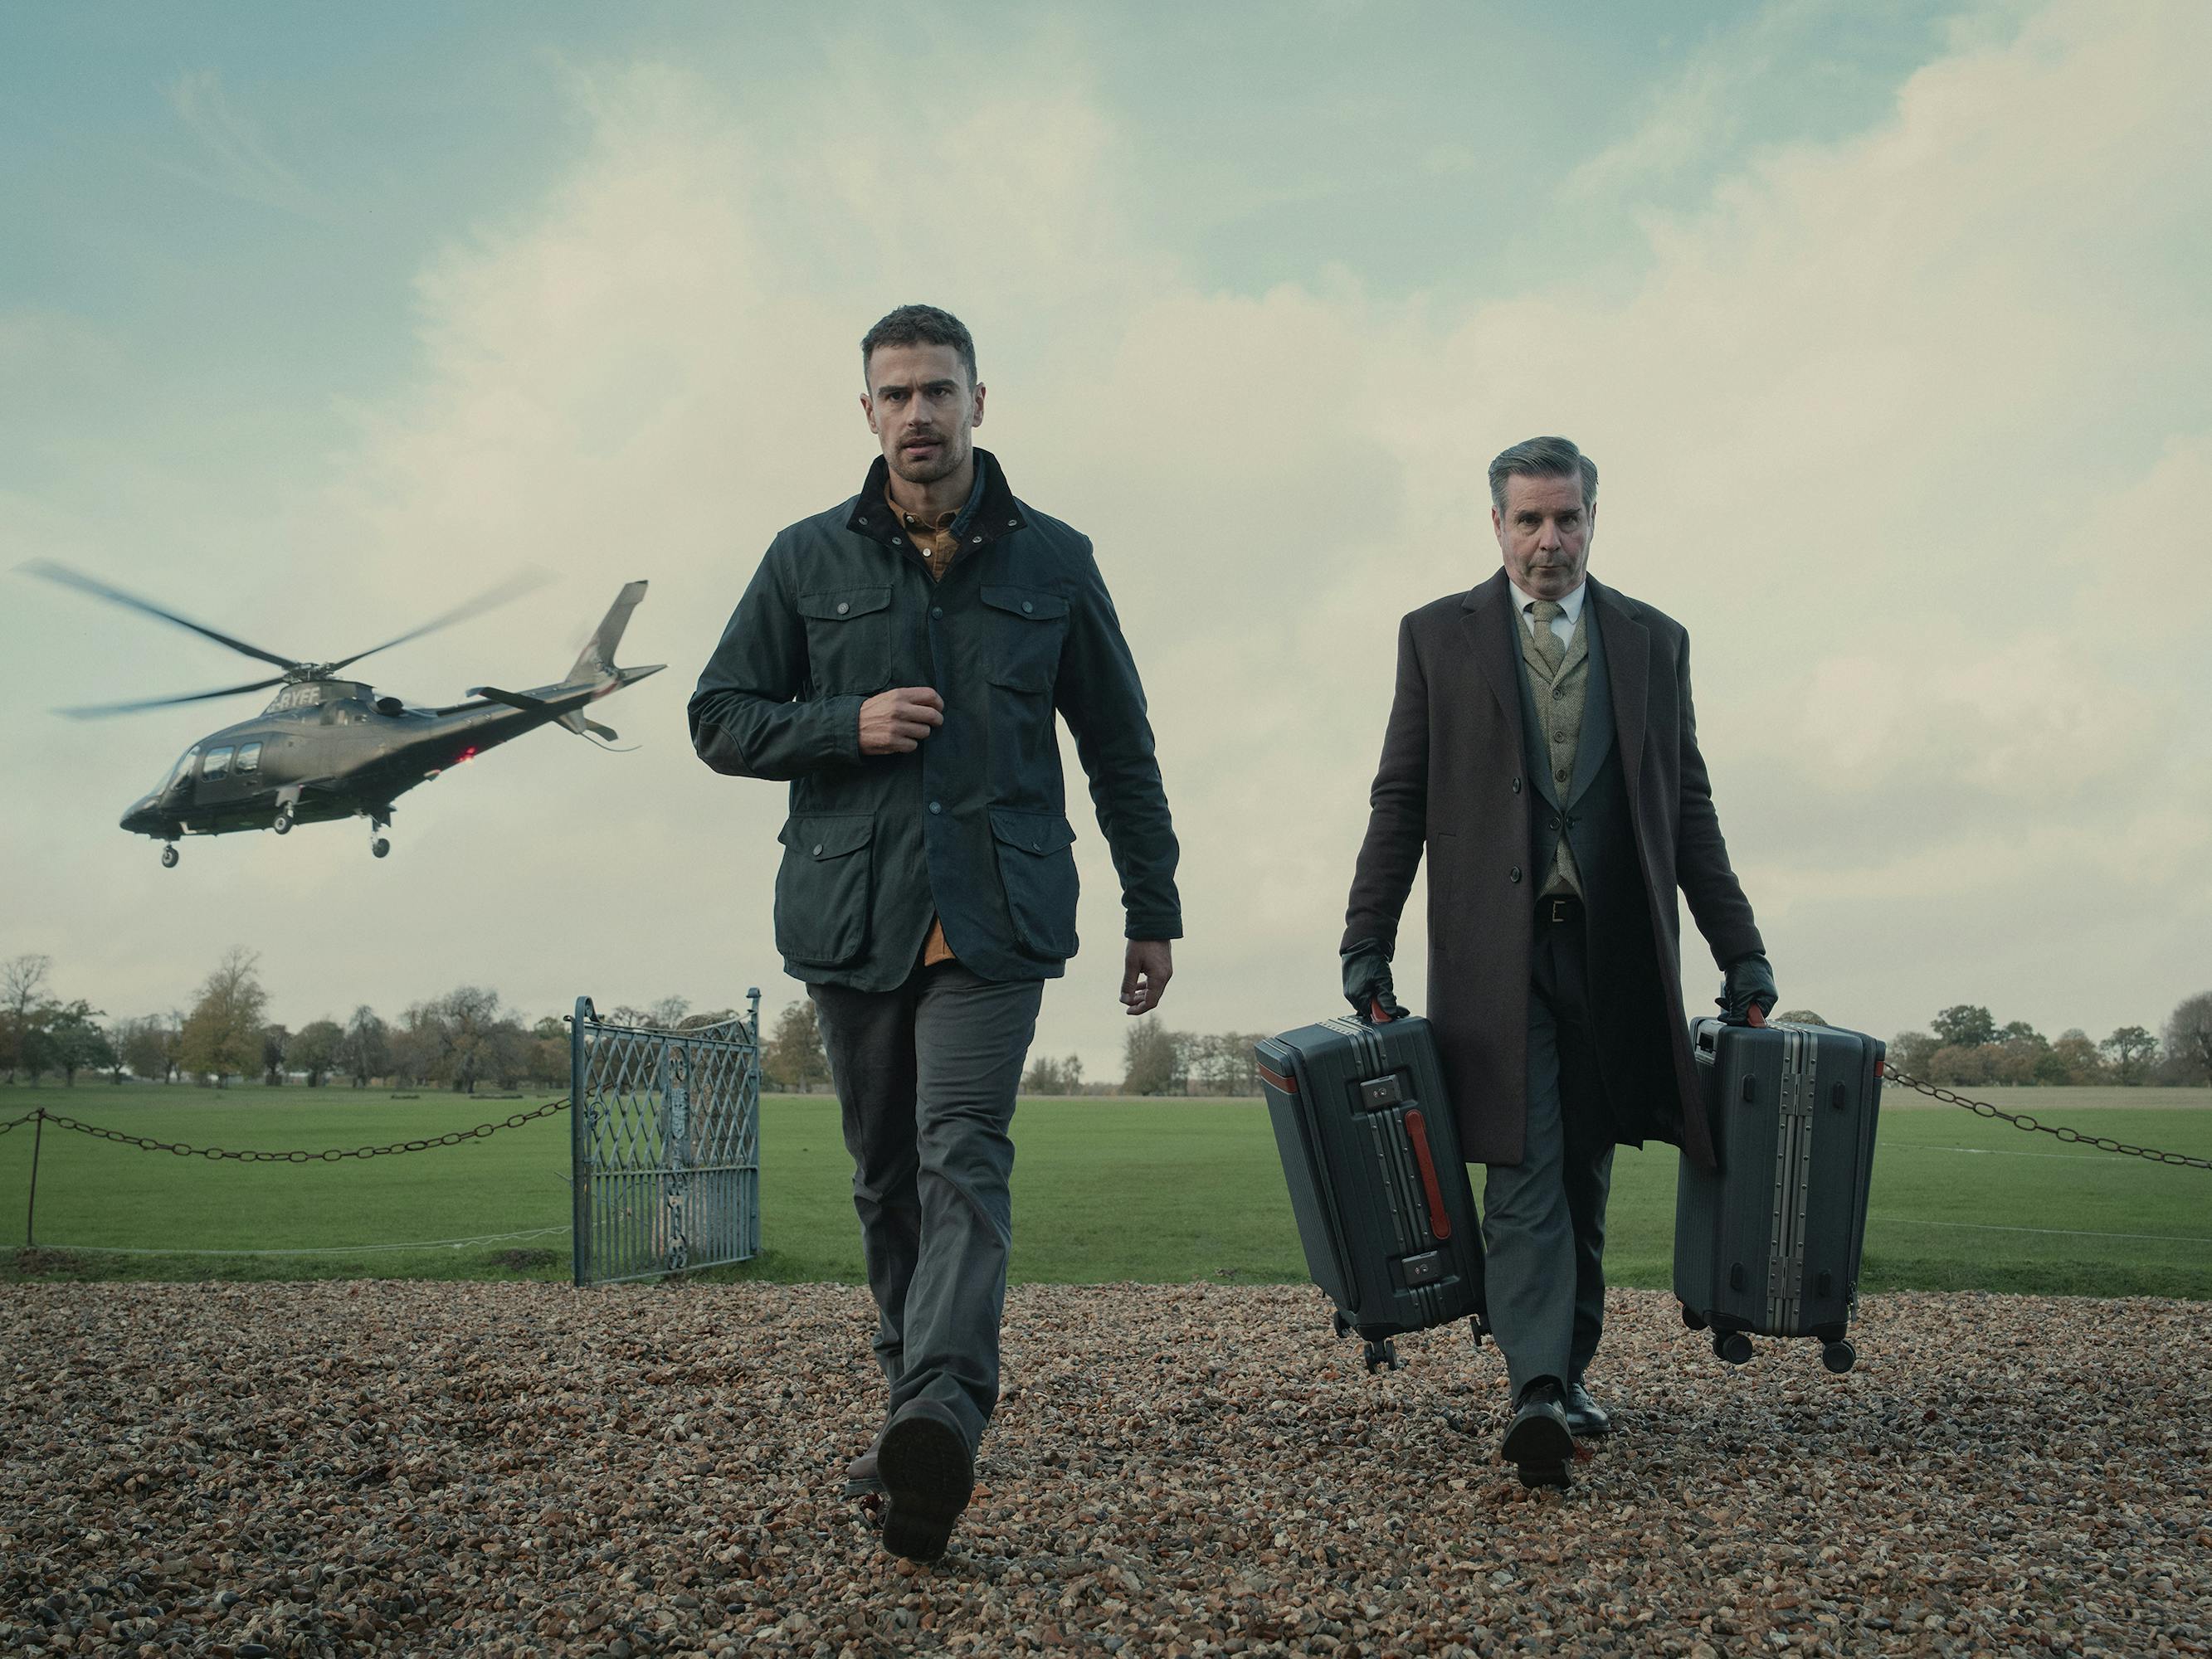  Eddie Horniman (Theo James) in The Gentlemen. Walking next to a man carrying two suitcases, James strides with purpose as a helicopter flies away in the background.